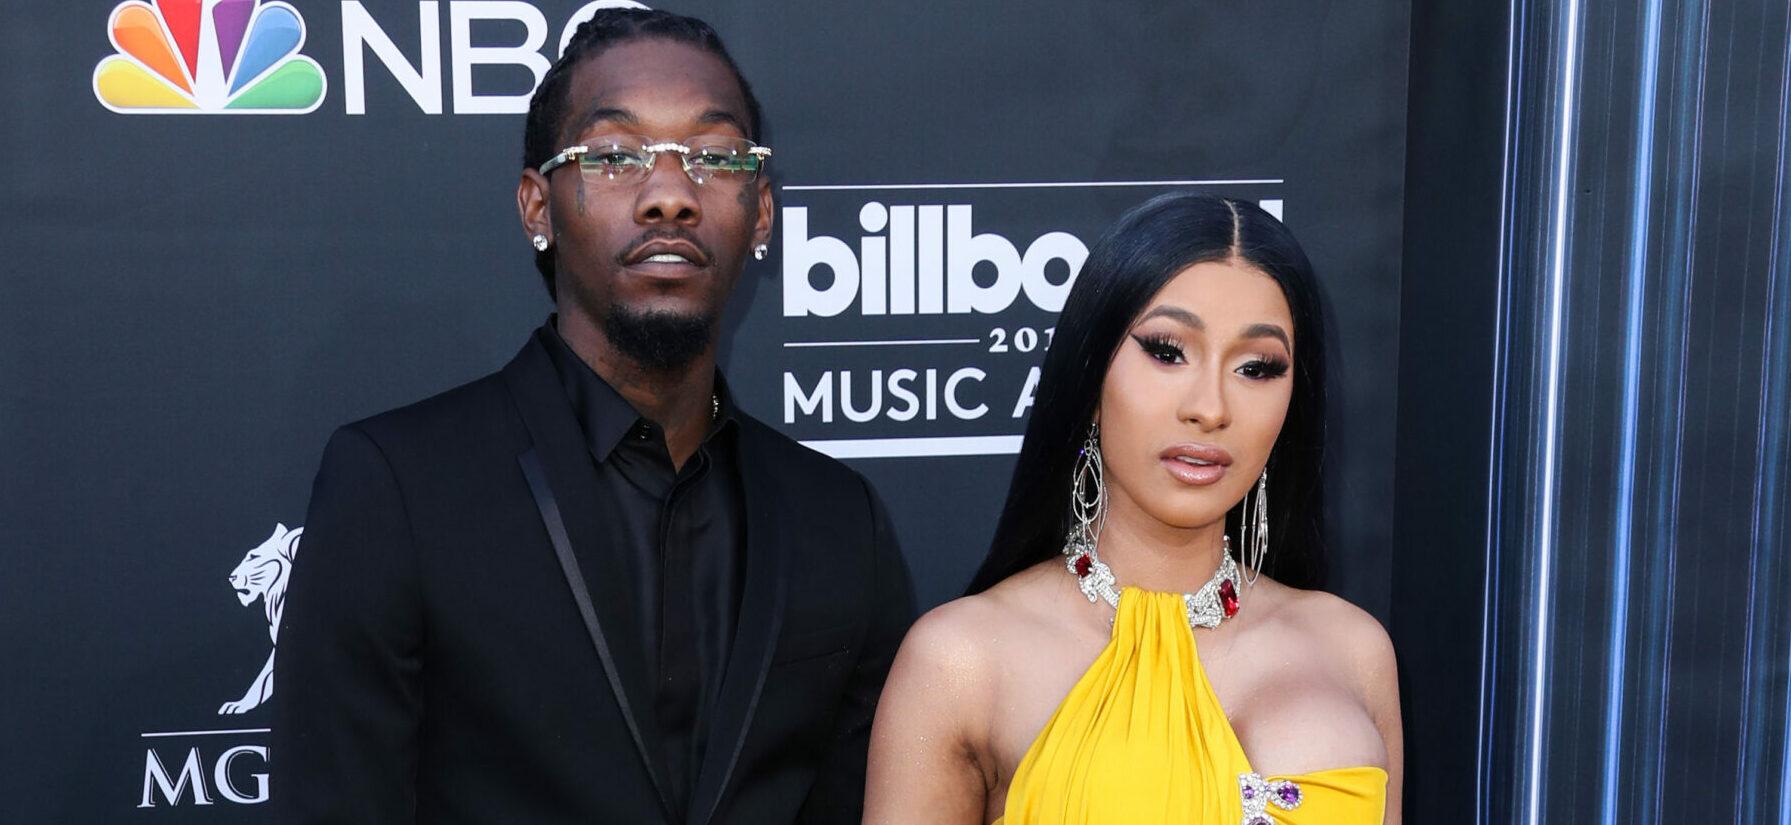 Cardi B and Offset Get Festive With INCREDIBLE Video Of Gift-Filled Living Room